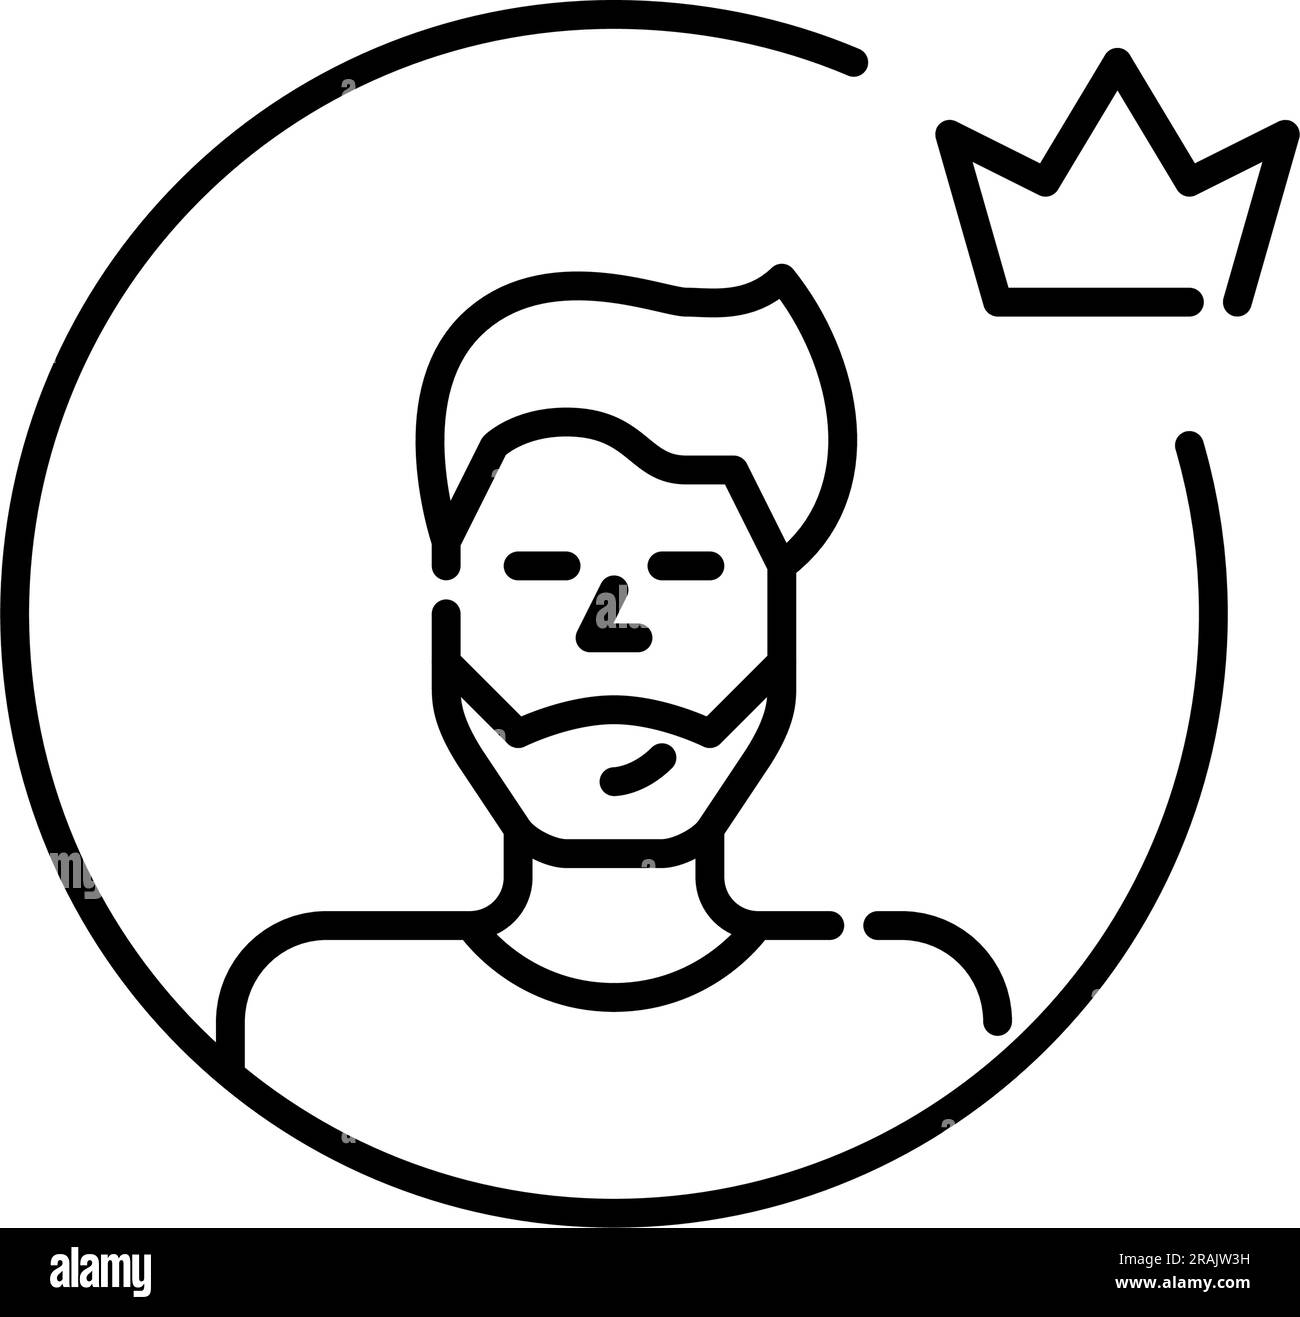 Premium user avatar. Young man with short hair and beard wearing t-shirt. Crown symbol. Pixel perfect, editable stroke Stock Vector